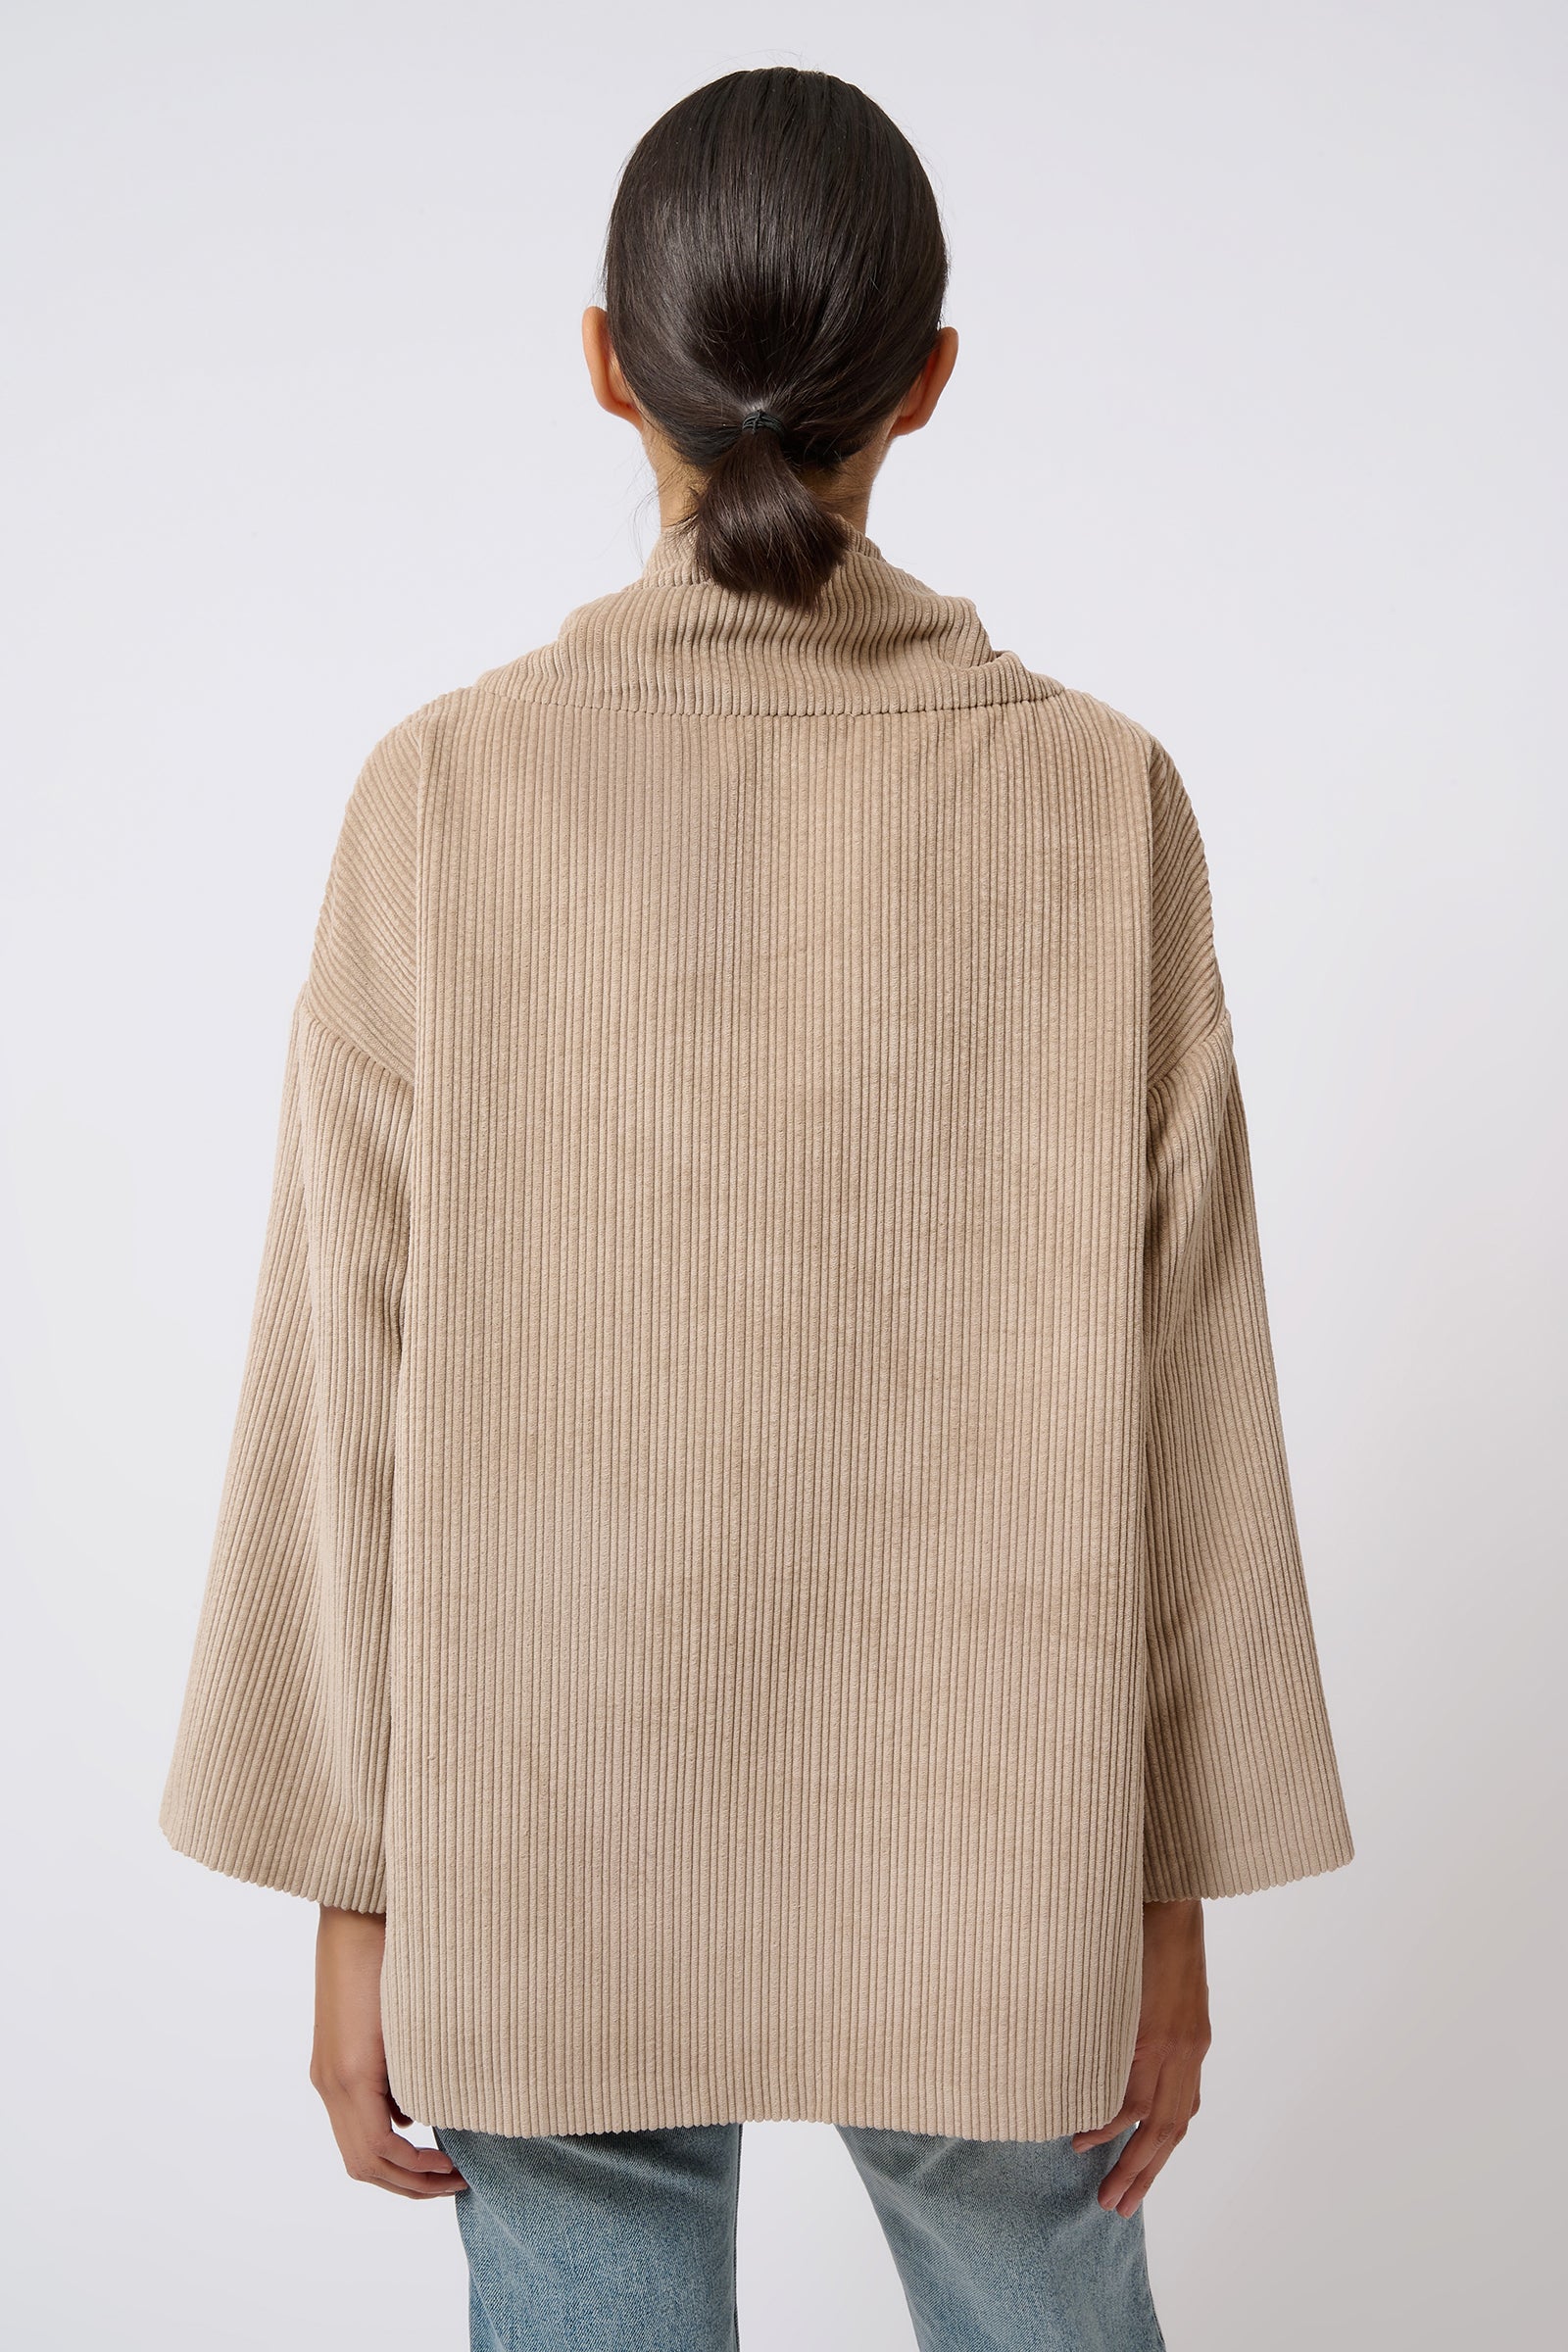 Kal Rieman Debbie Drawstring Pullover in Beige on Model with Hand on Hip Front View